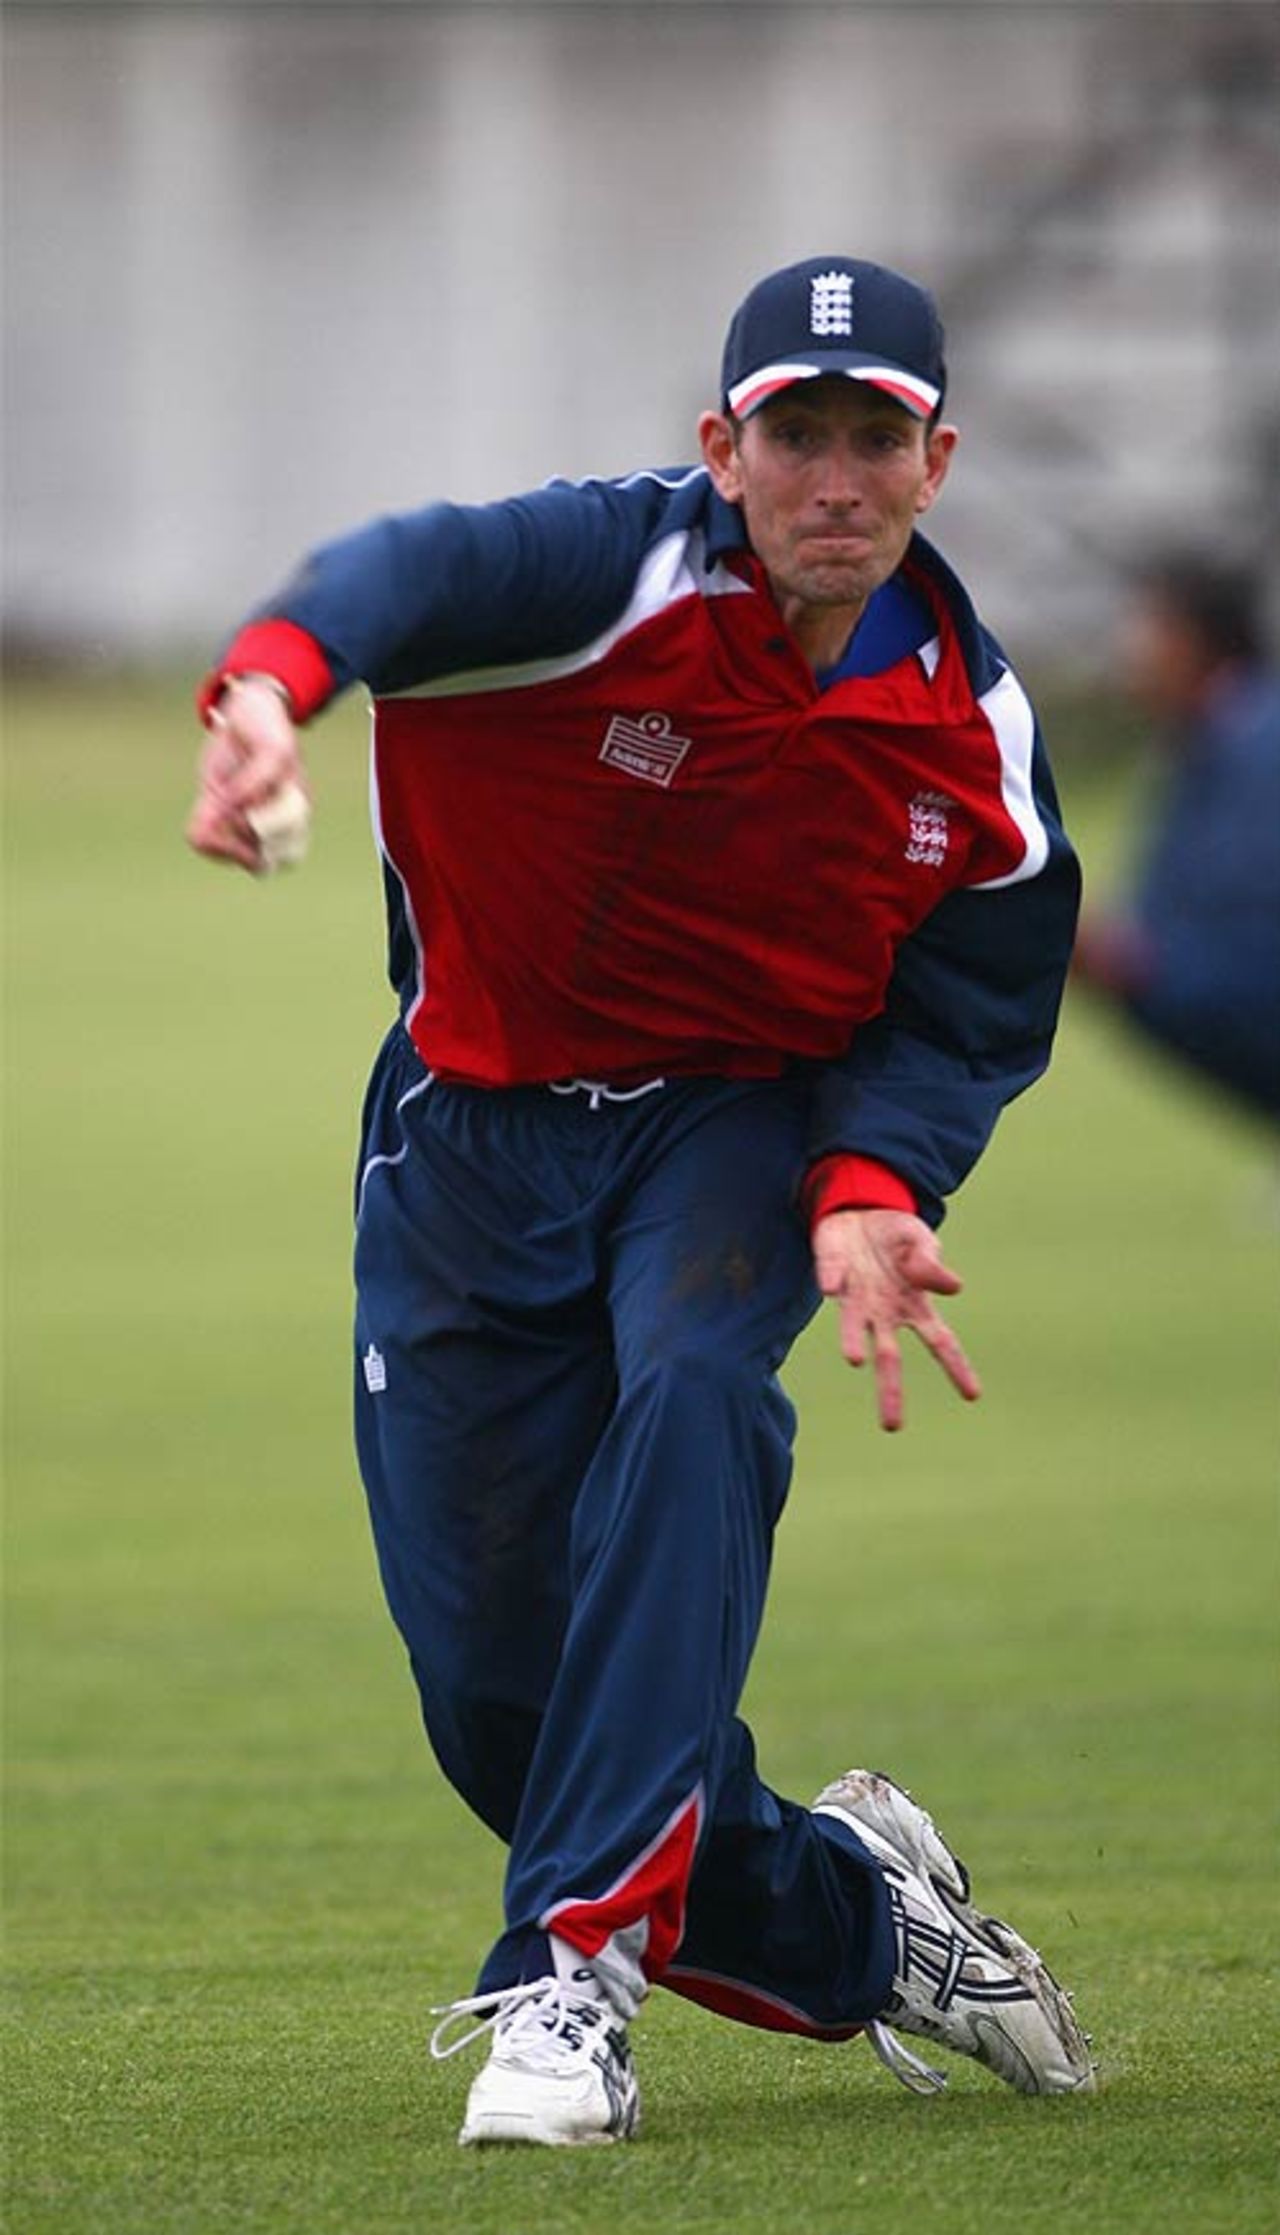 James Kirtley does some fielding practice, Cape Town, September 11, 2007